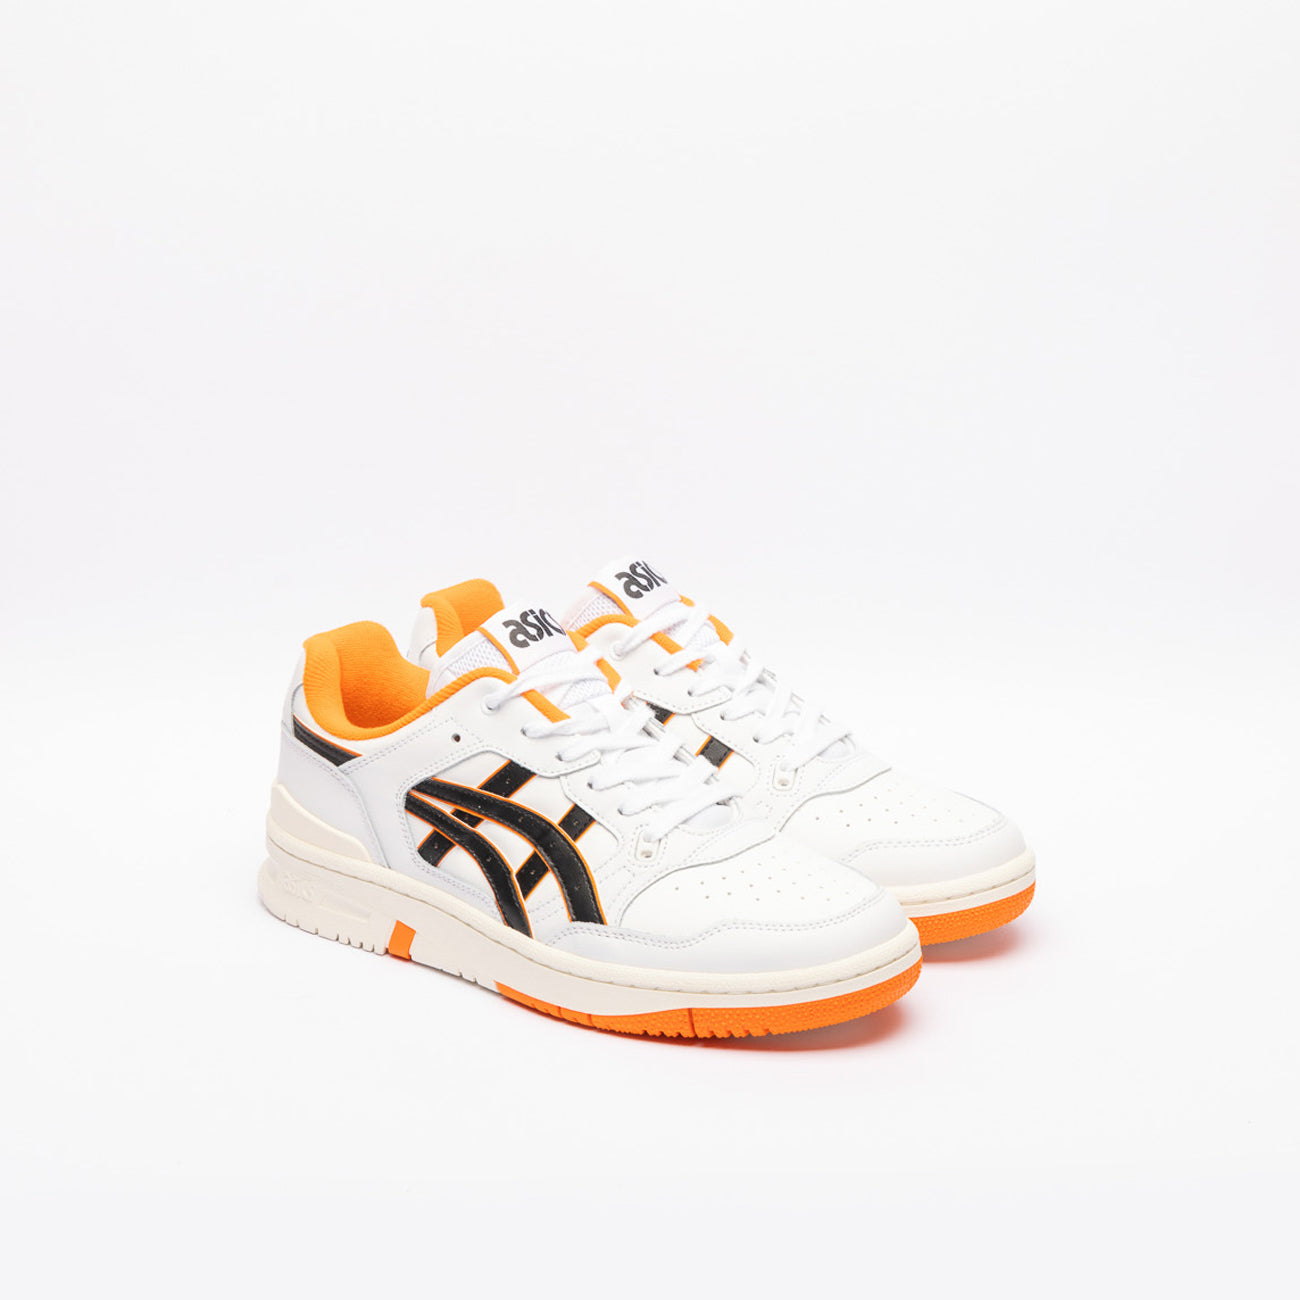 Asics EX89 white leather low-top basketball sneaker with black logo